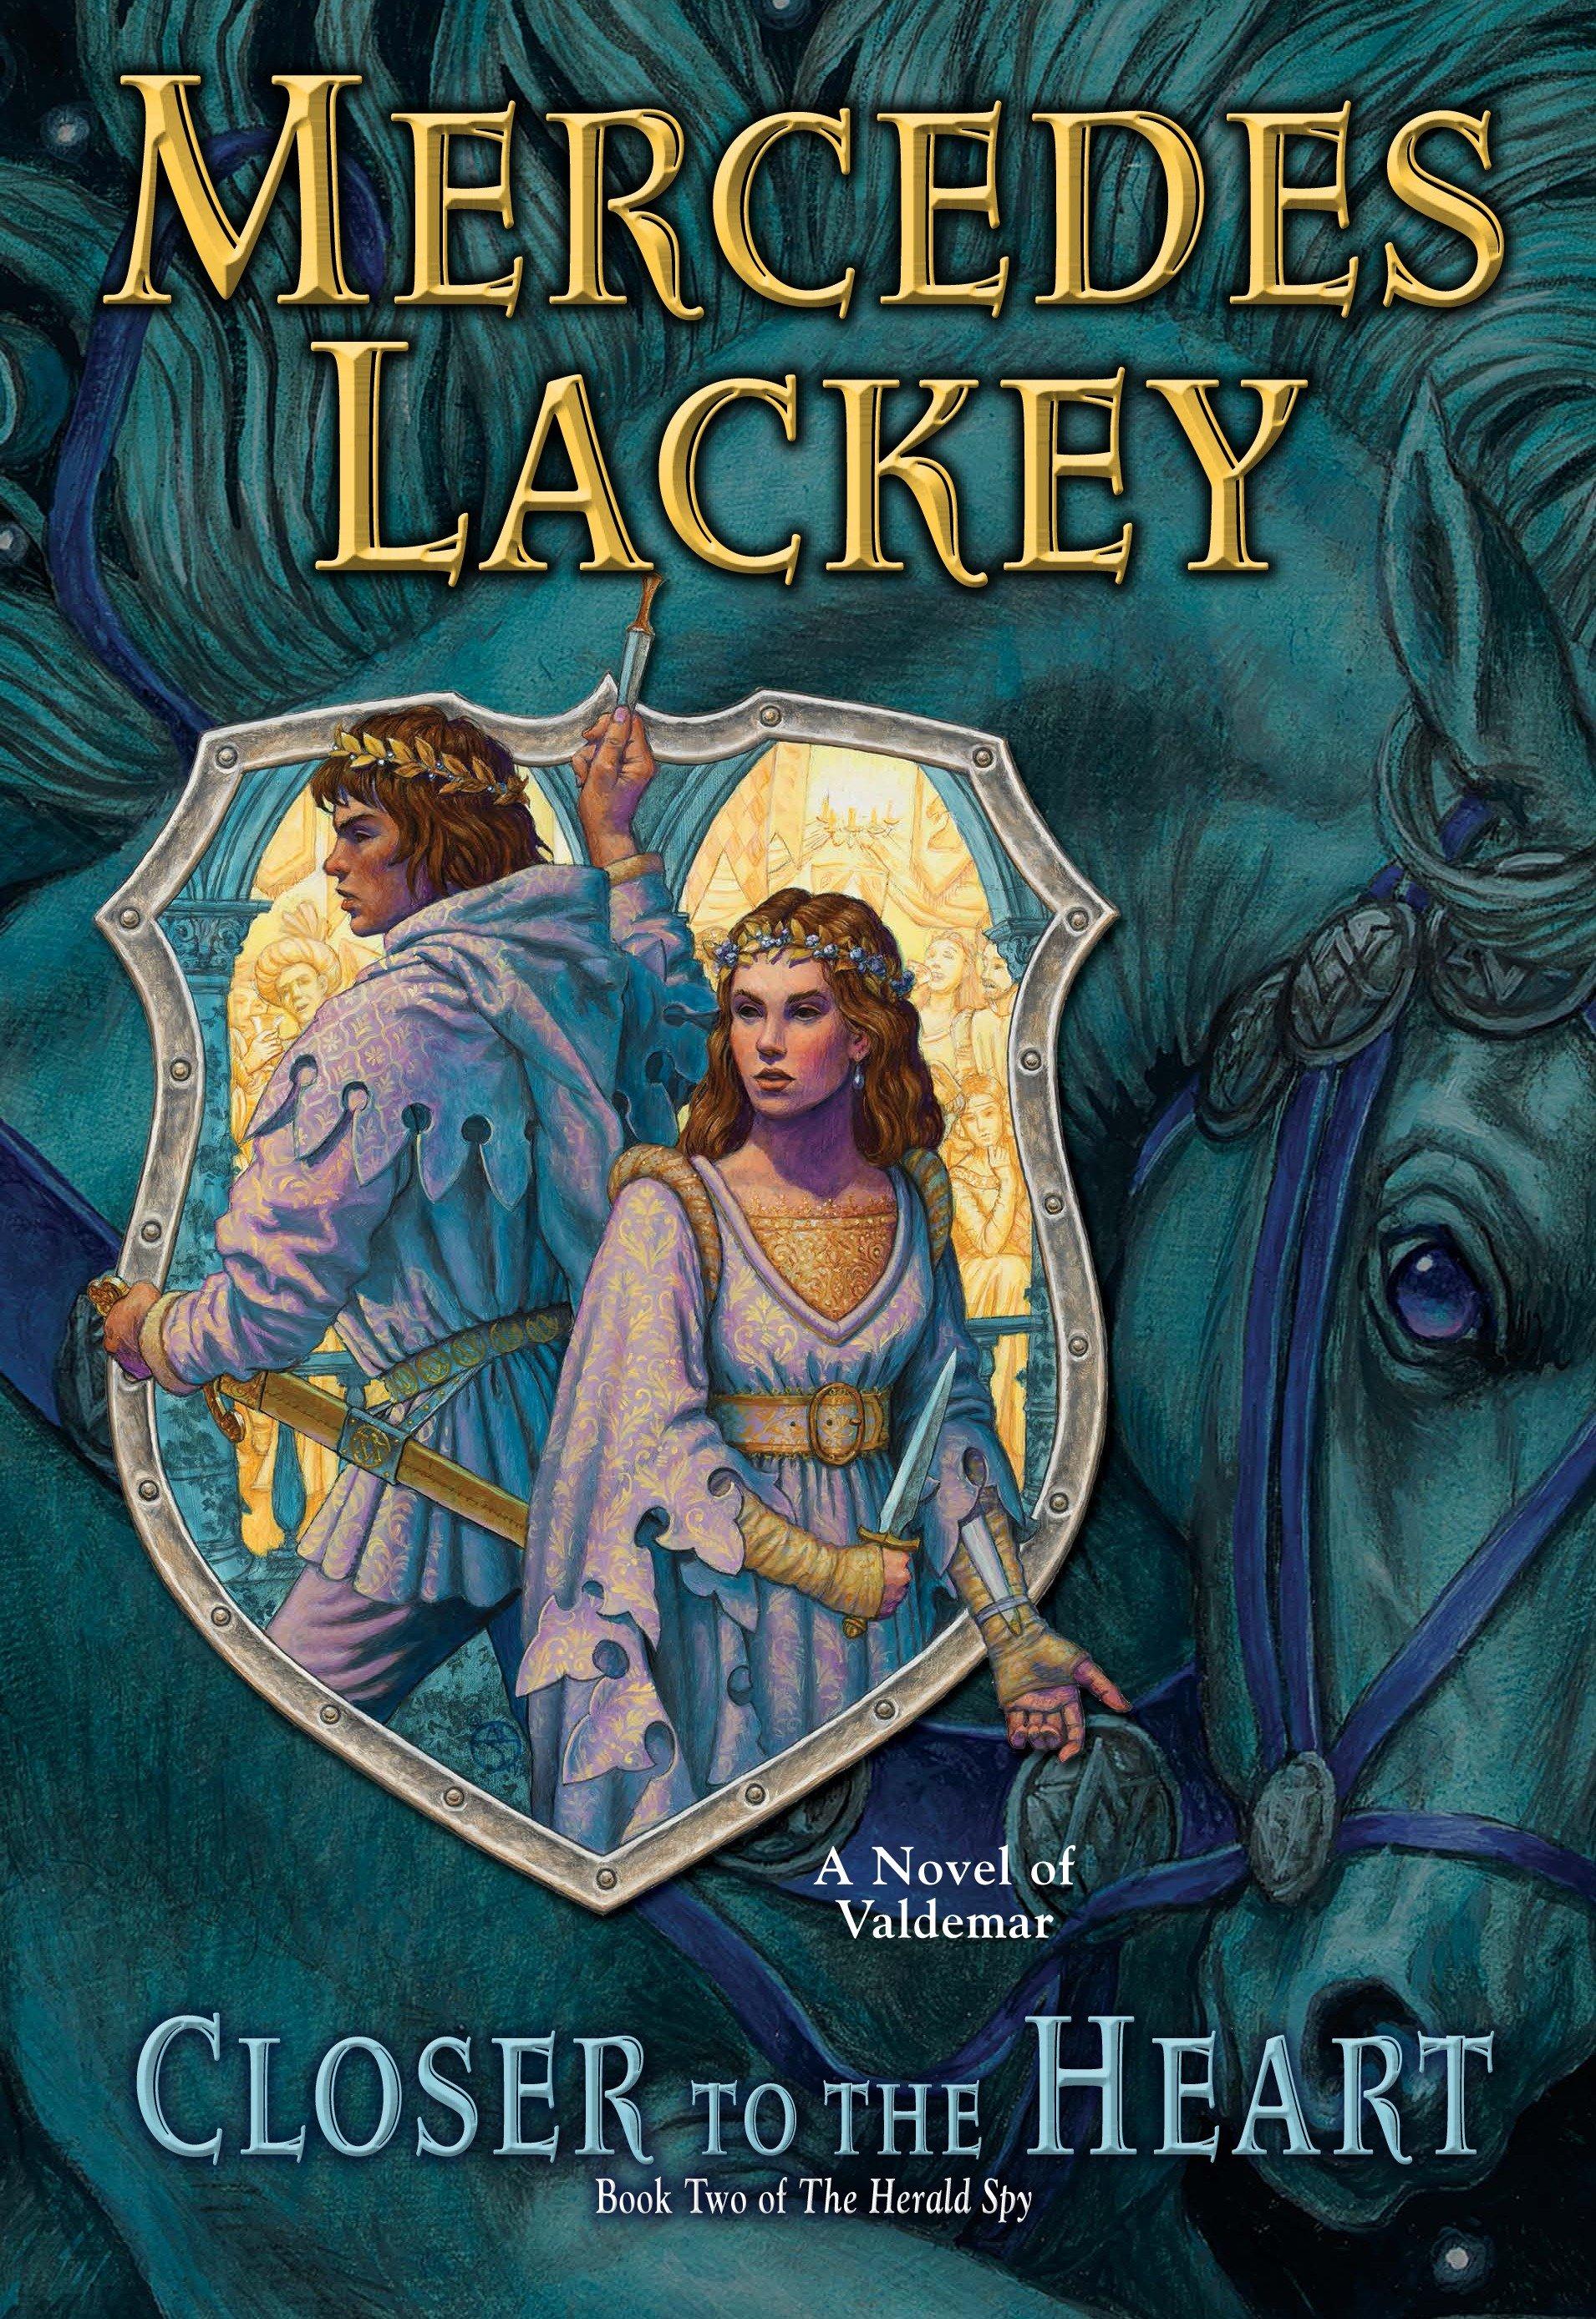 Closer to the Heart: Book Two of Herald Spy - Mercedes Lackey